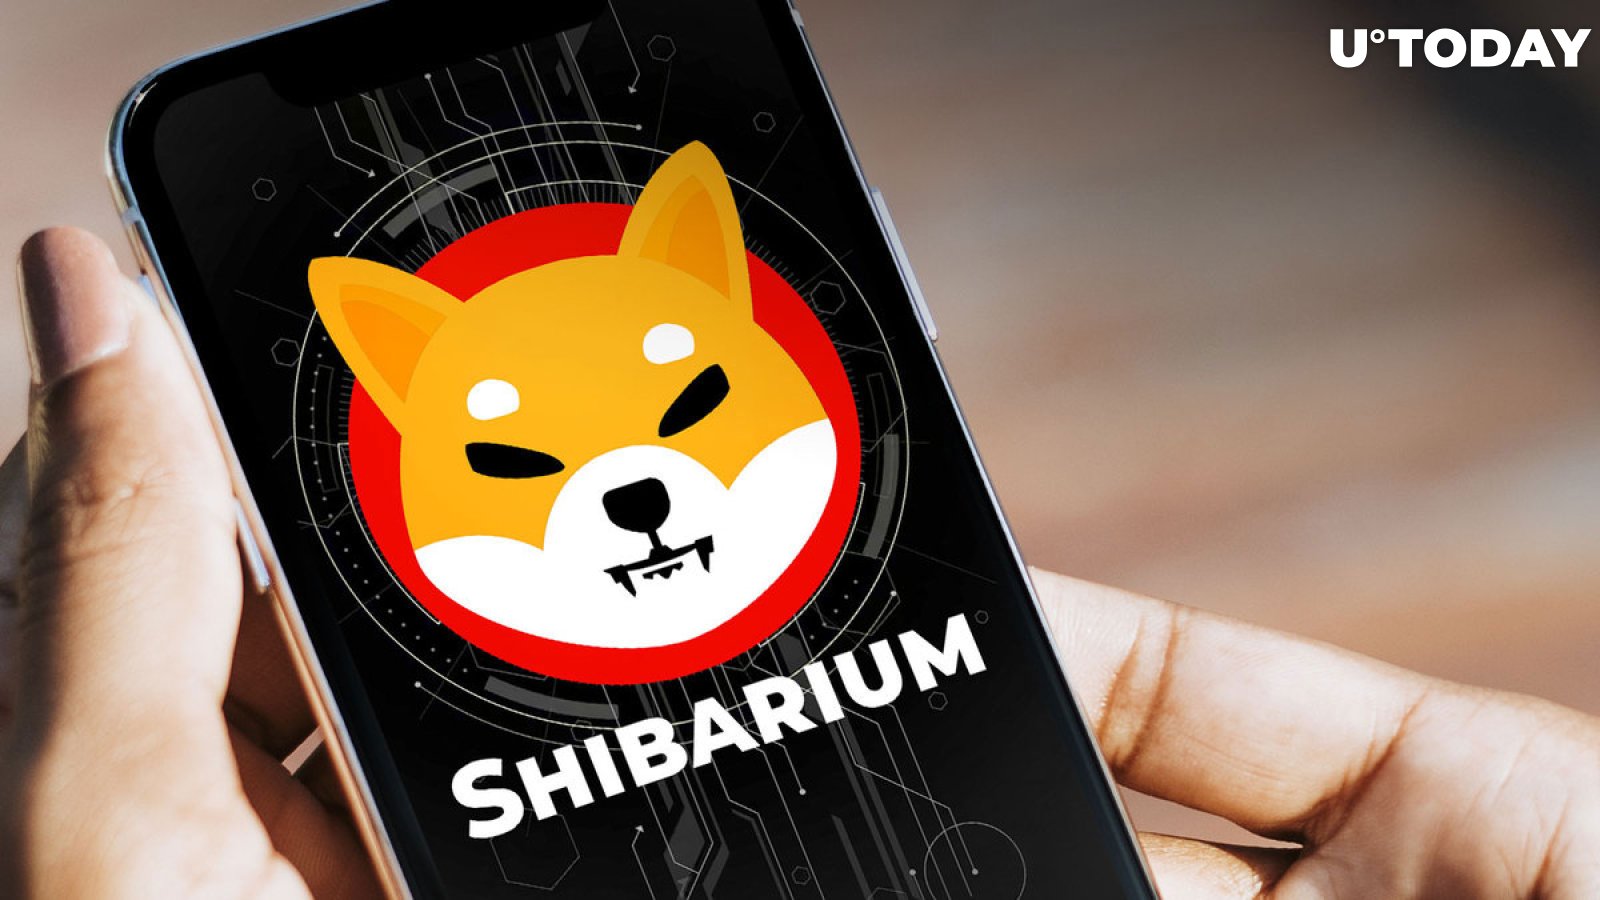 Shiba Inu's Shibarium Attracts Over 3,000 Intake Forms From Builders as Launch Nears